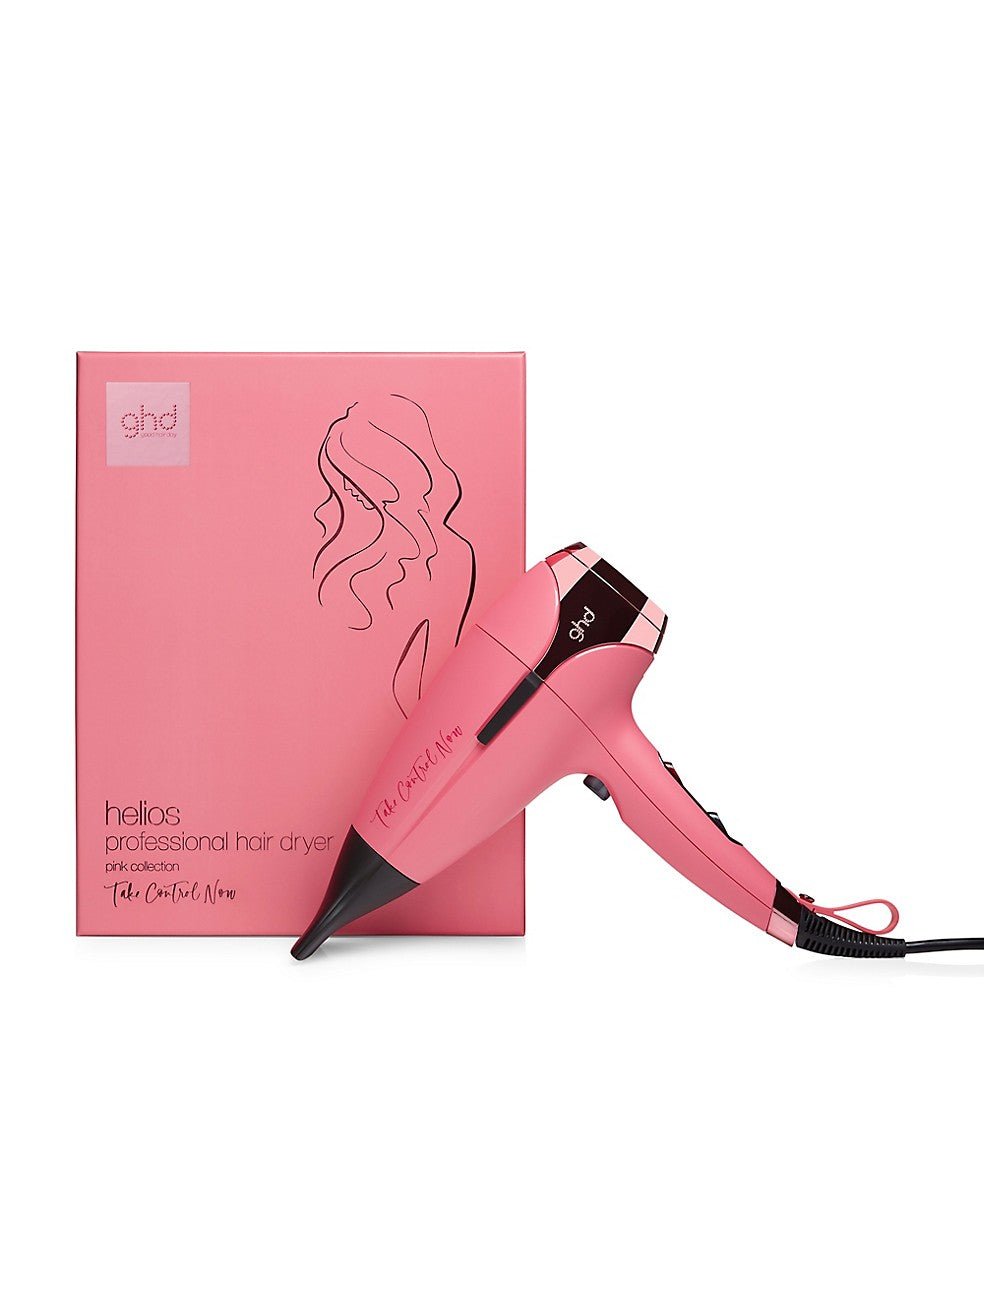 ghd Helios 1875W Advanced Professional Hair Dryer - Grand-Luxe Collection